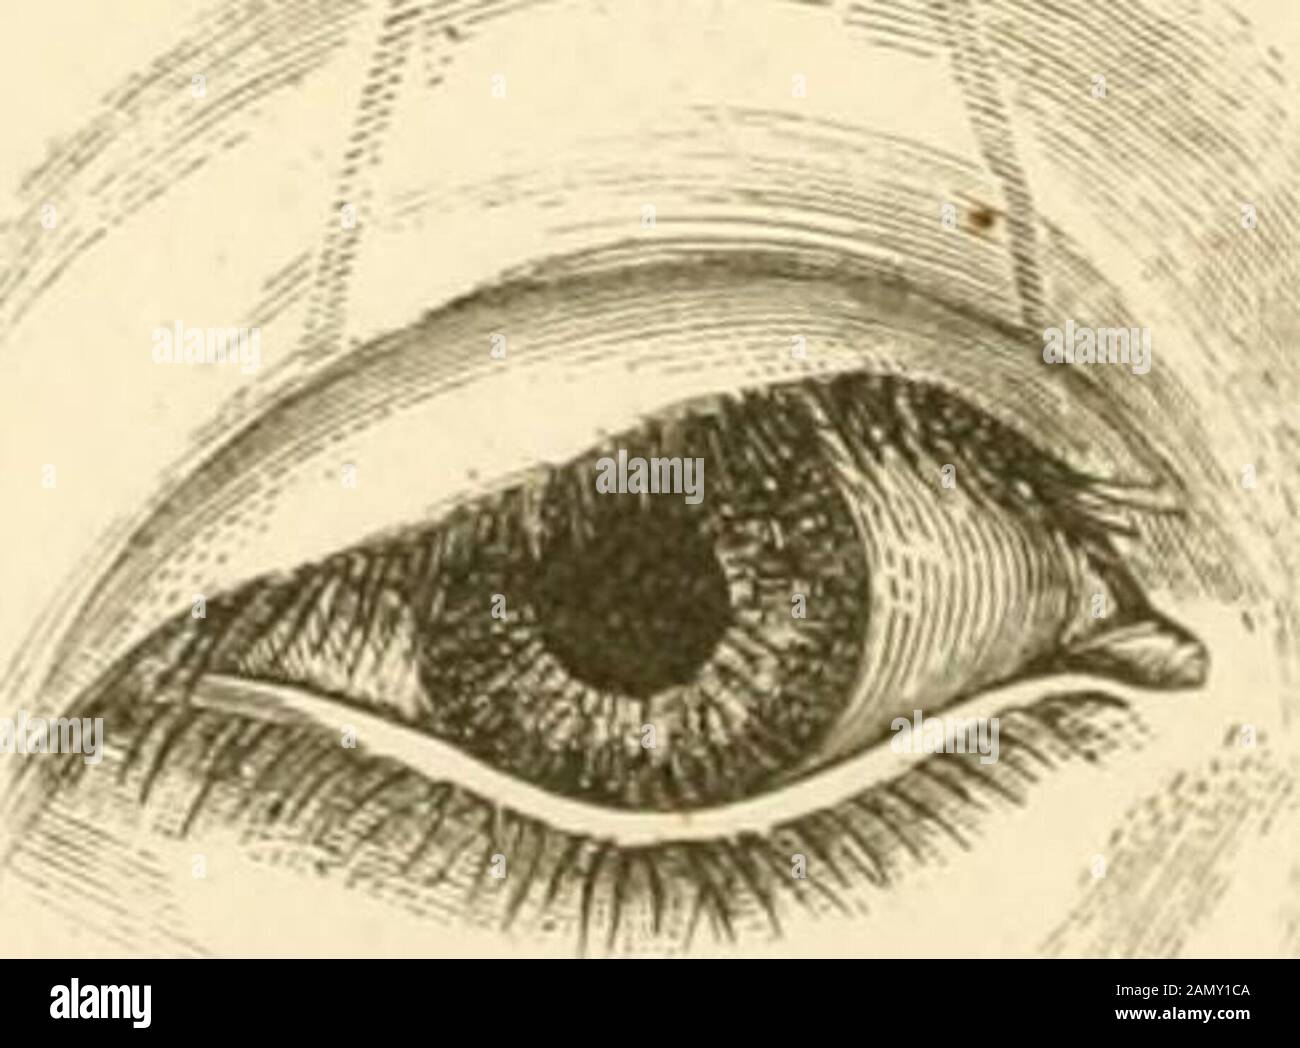 A treatise on the diseases of the eye . ^. 49 DESCRIPTION OF PLATE IX. Figs. 155, 156—Represent Ectiiopium. from Caries of thf. Orbit, and Prof. AmmonsOperation for its Cure. (Seep. 146.) Fig. 157.—Illustration of Frickes Operation for Ectropium Br Transplantationof a portion of Skin. (See p. 147.) Figs. 158, 159.—Illustration of T. Wharton Jones Operation for Ectropium. (See Note, p. 147.) Pl. X. Fig. 160. Stock Photo